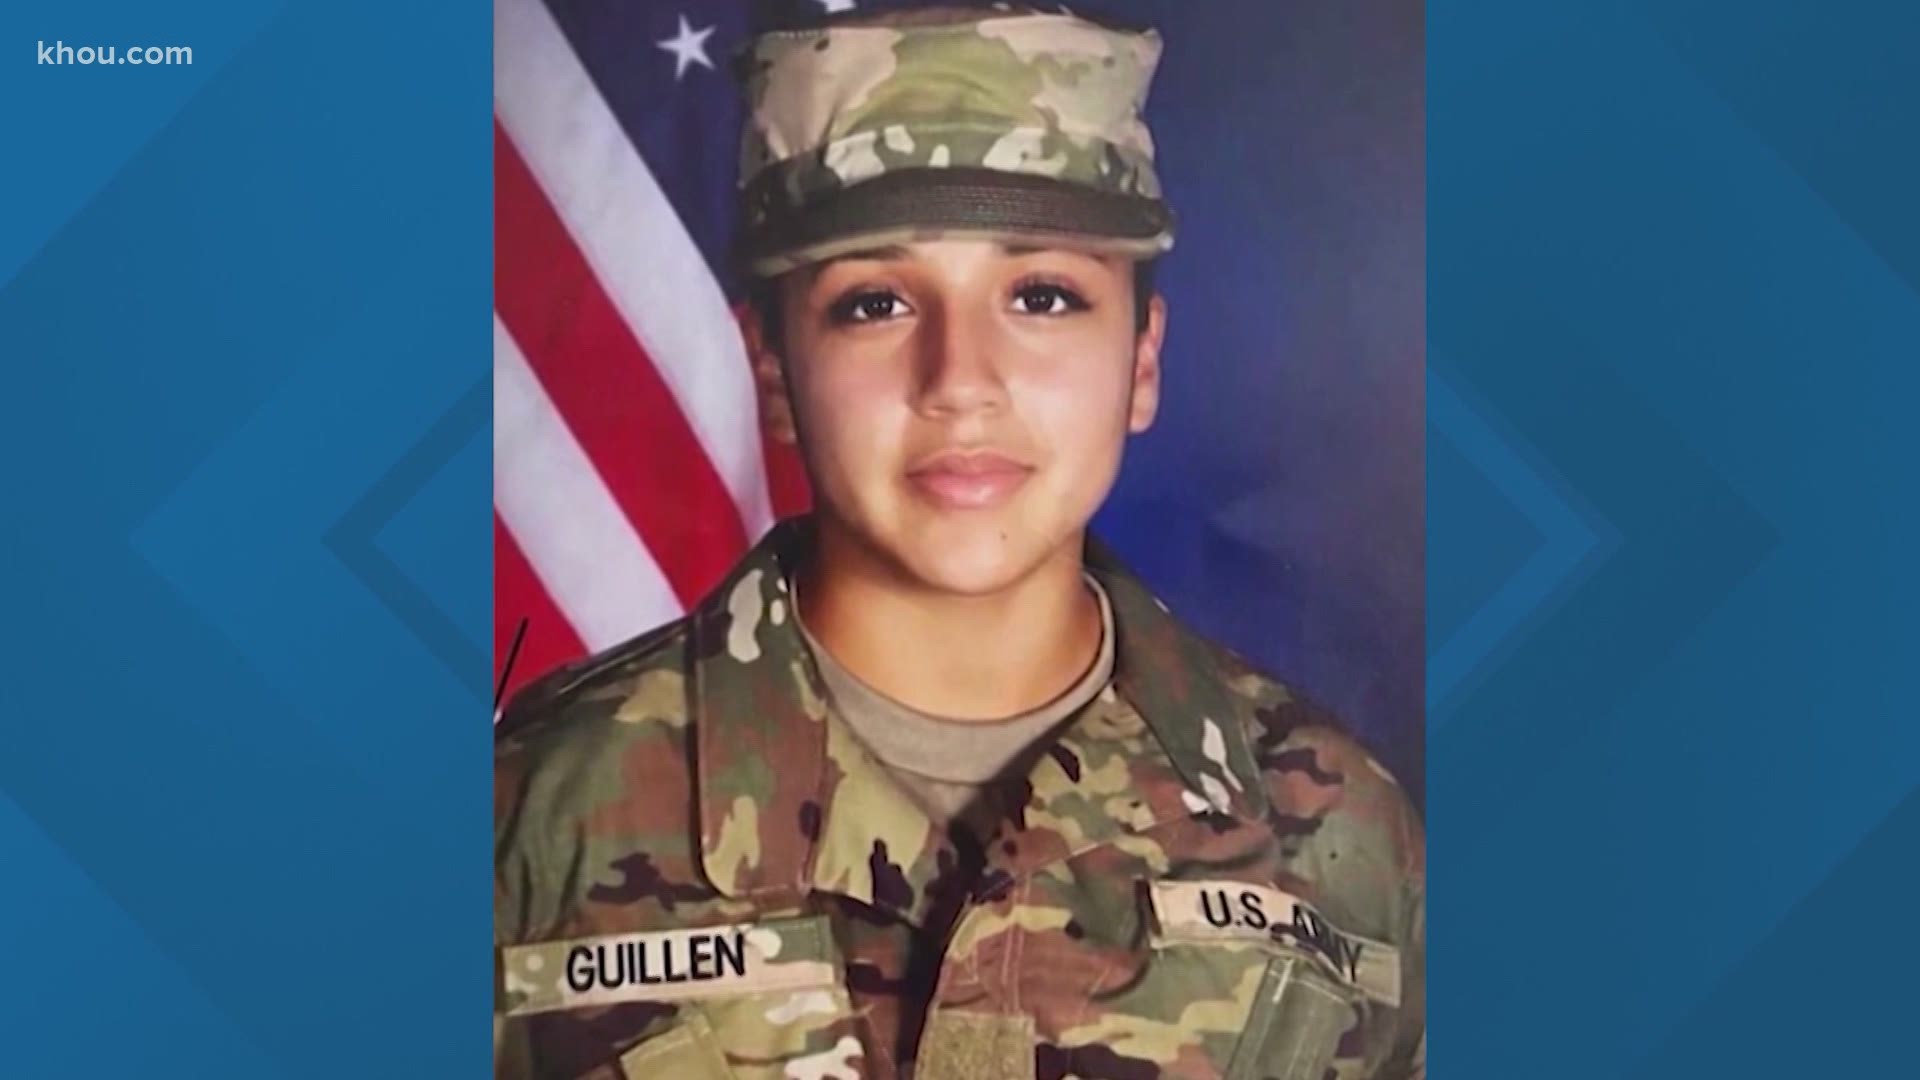 It's been two months since 20-year-old Vanessa Guillen was seen at Fort Hood. Her family is wondering how could a soldier disappear.